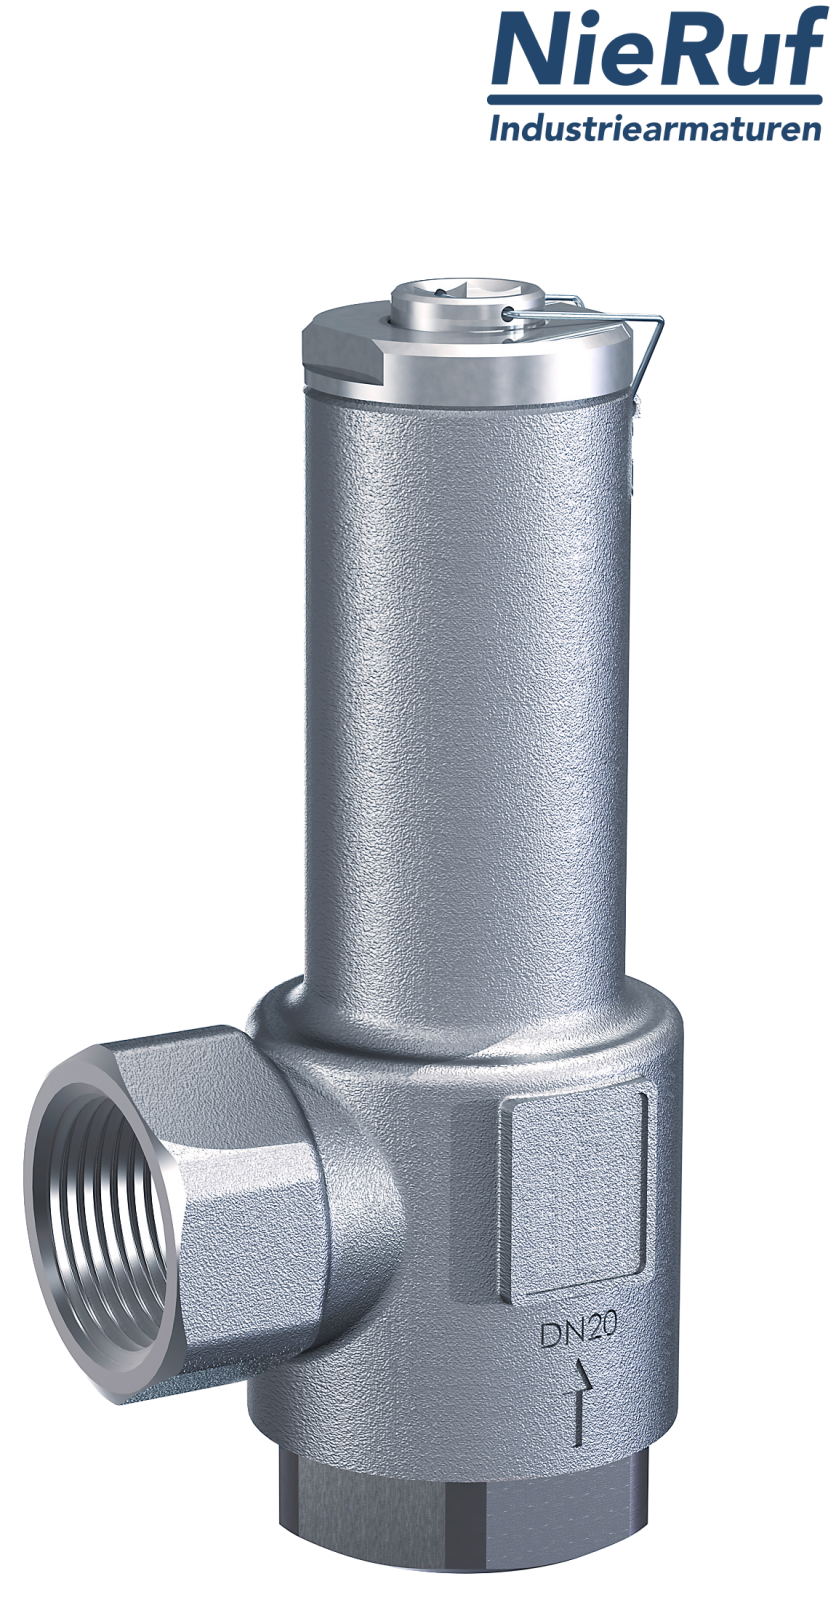 angle-type overflow valve 2" inch fm UV03 stainless steel AISI 316L 2 - 12 bar